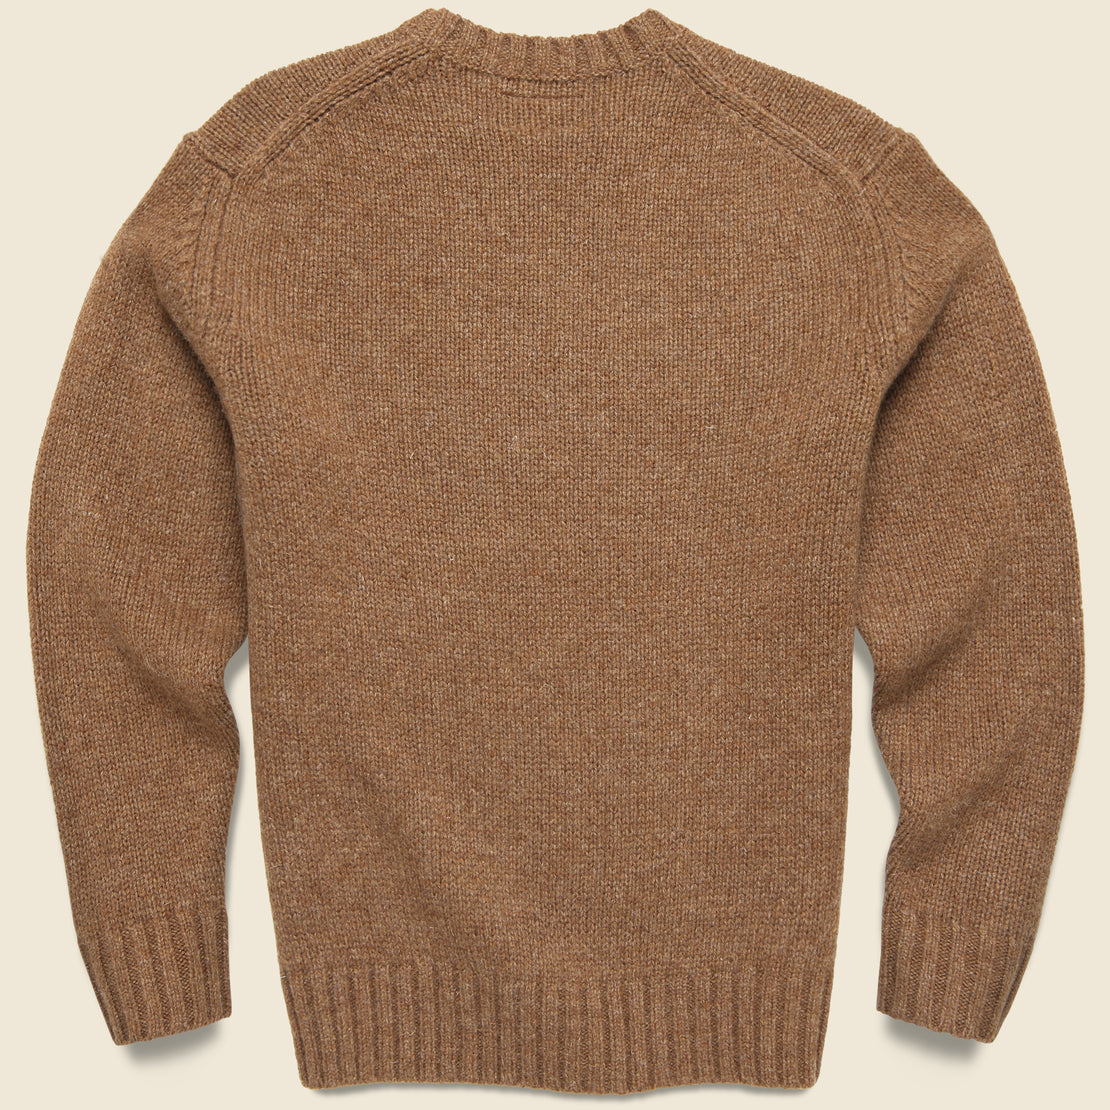 Intarsia 3G Crewneck Ducks Sweater - Brown - BEAMS+ - STAG Provisions - Tops - Sweater